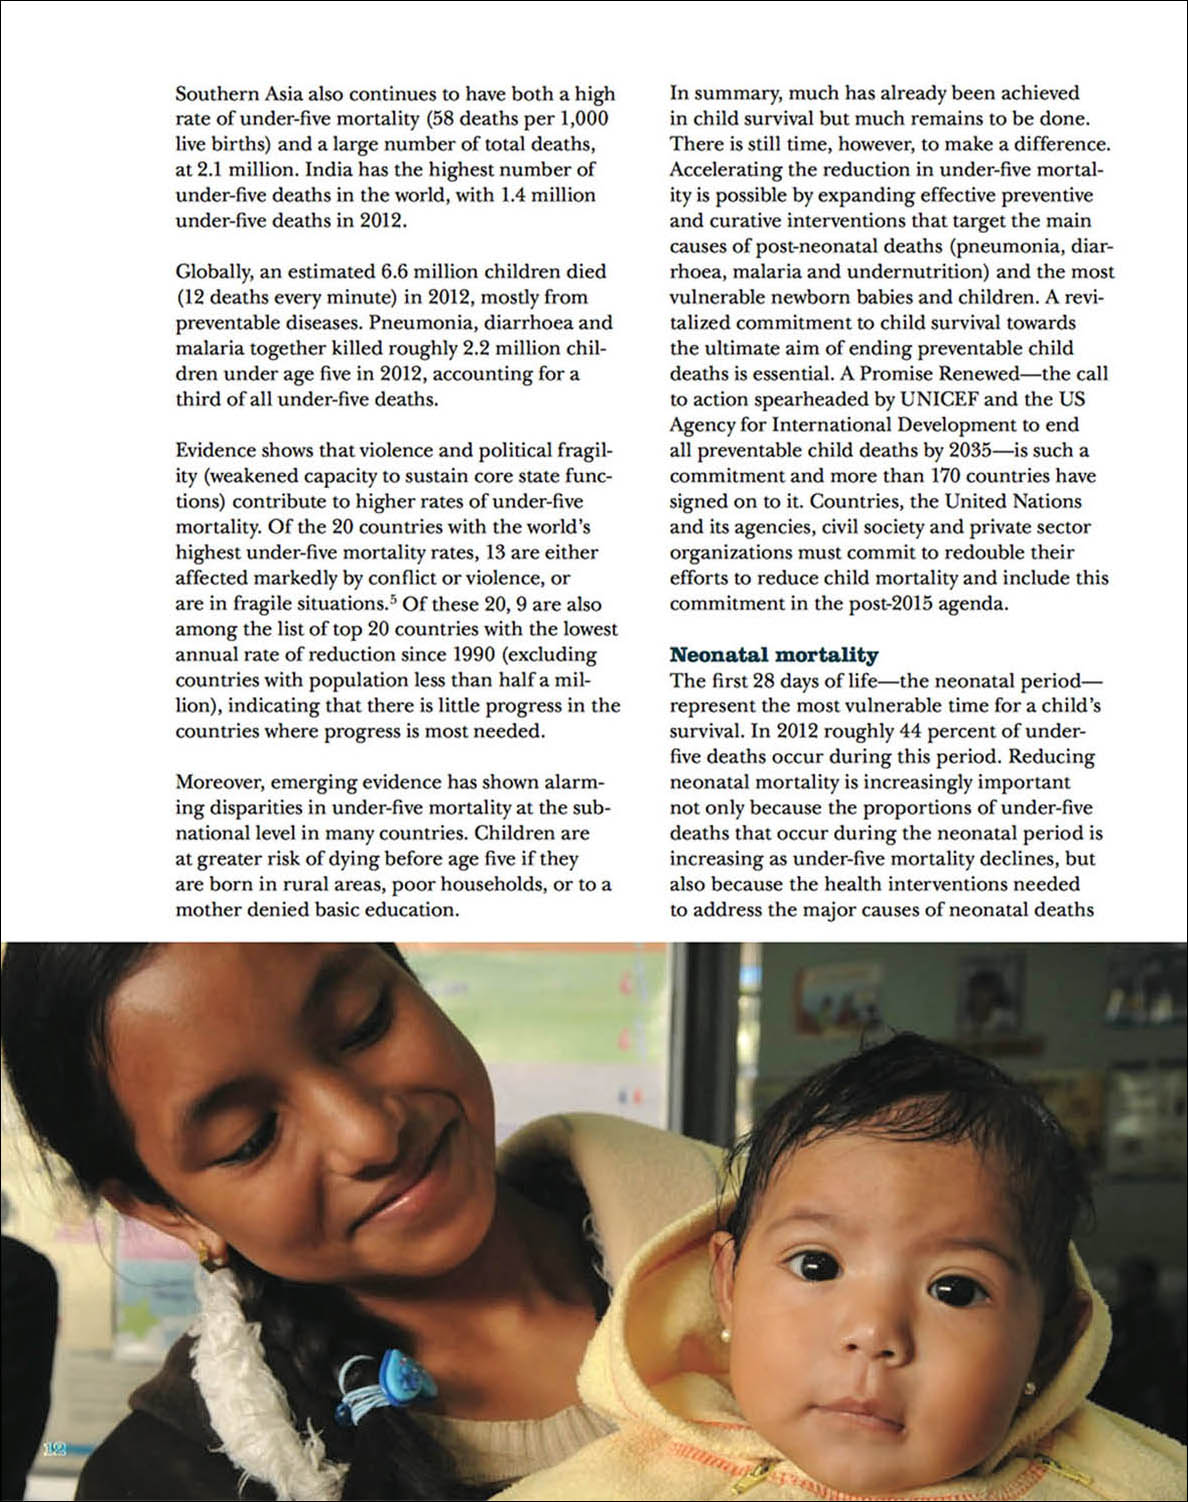 Screen capture/tearsheet showing a young mother holding her infant daughter.